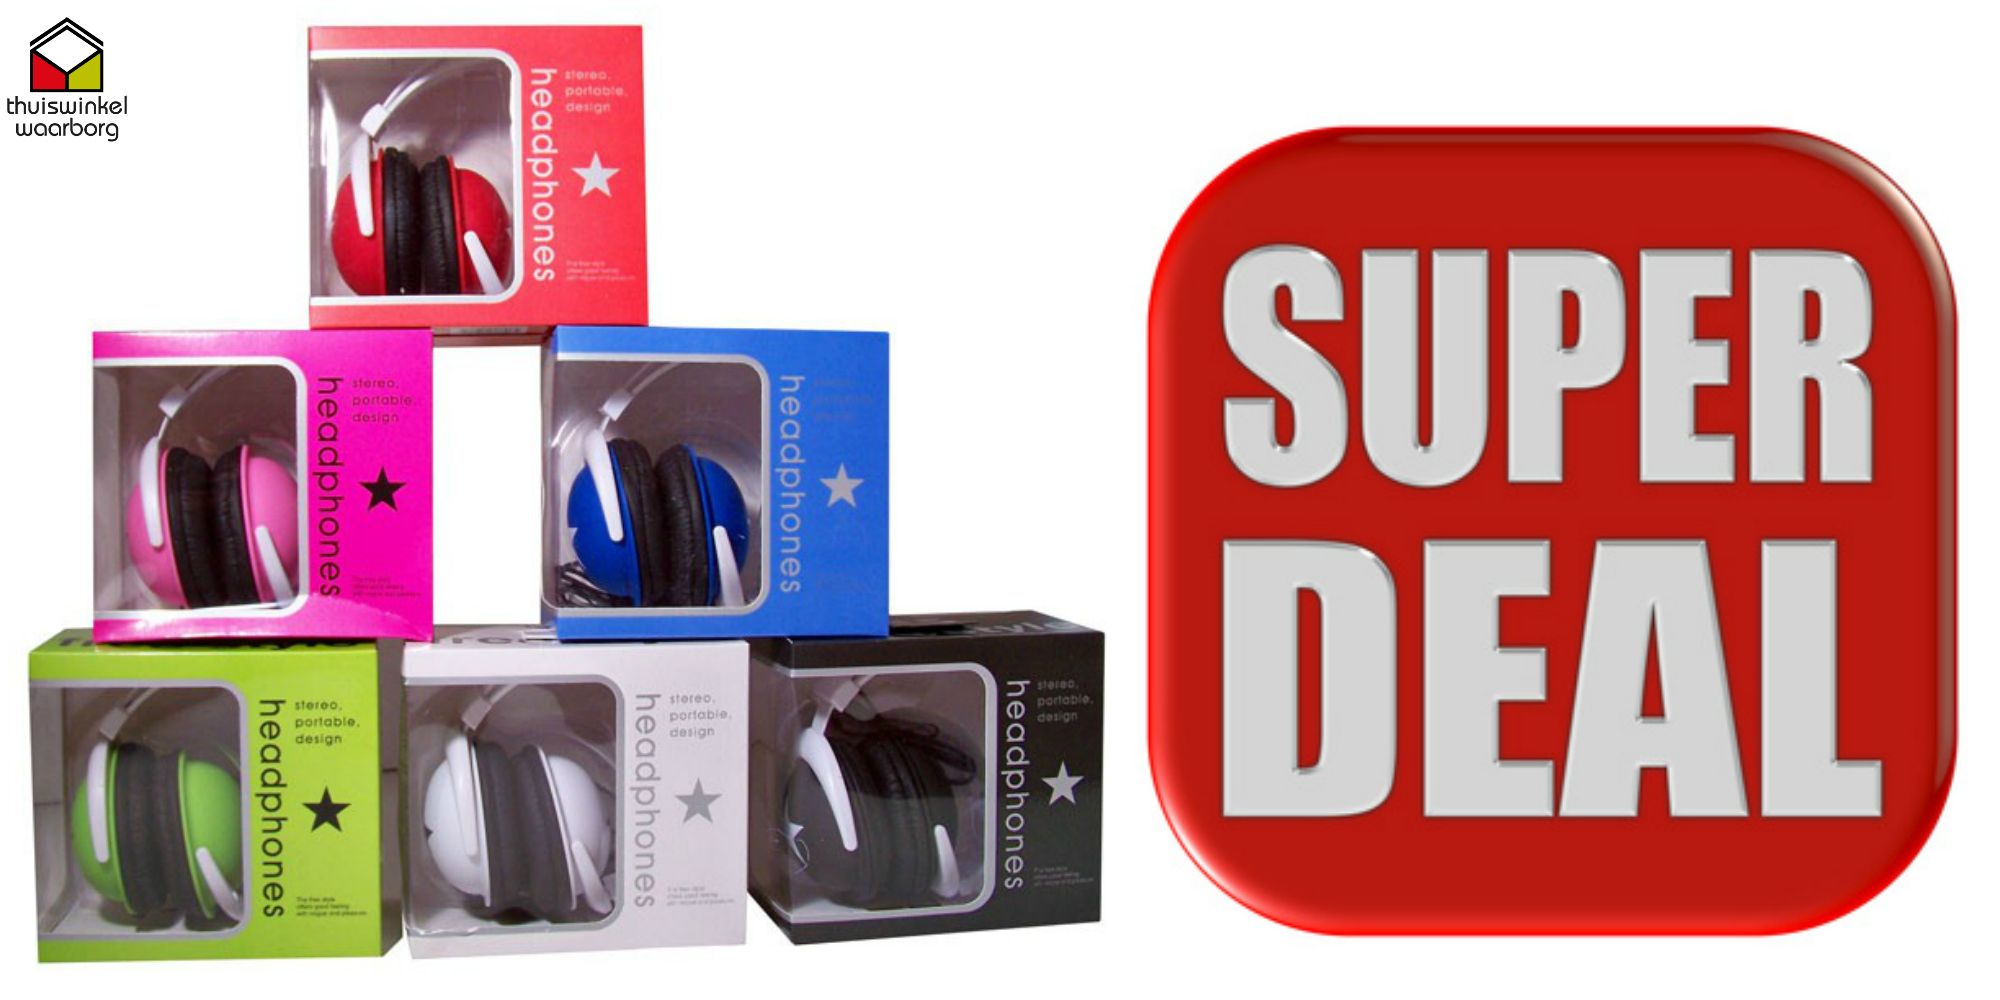 One Day Price - Free style deluxe headset!